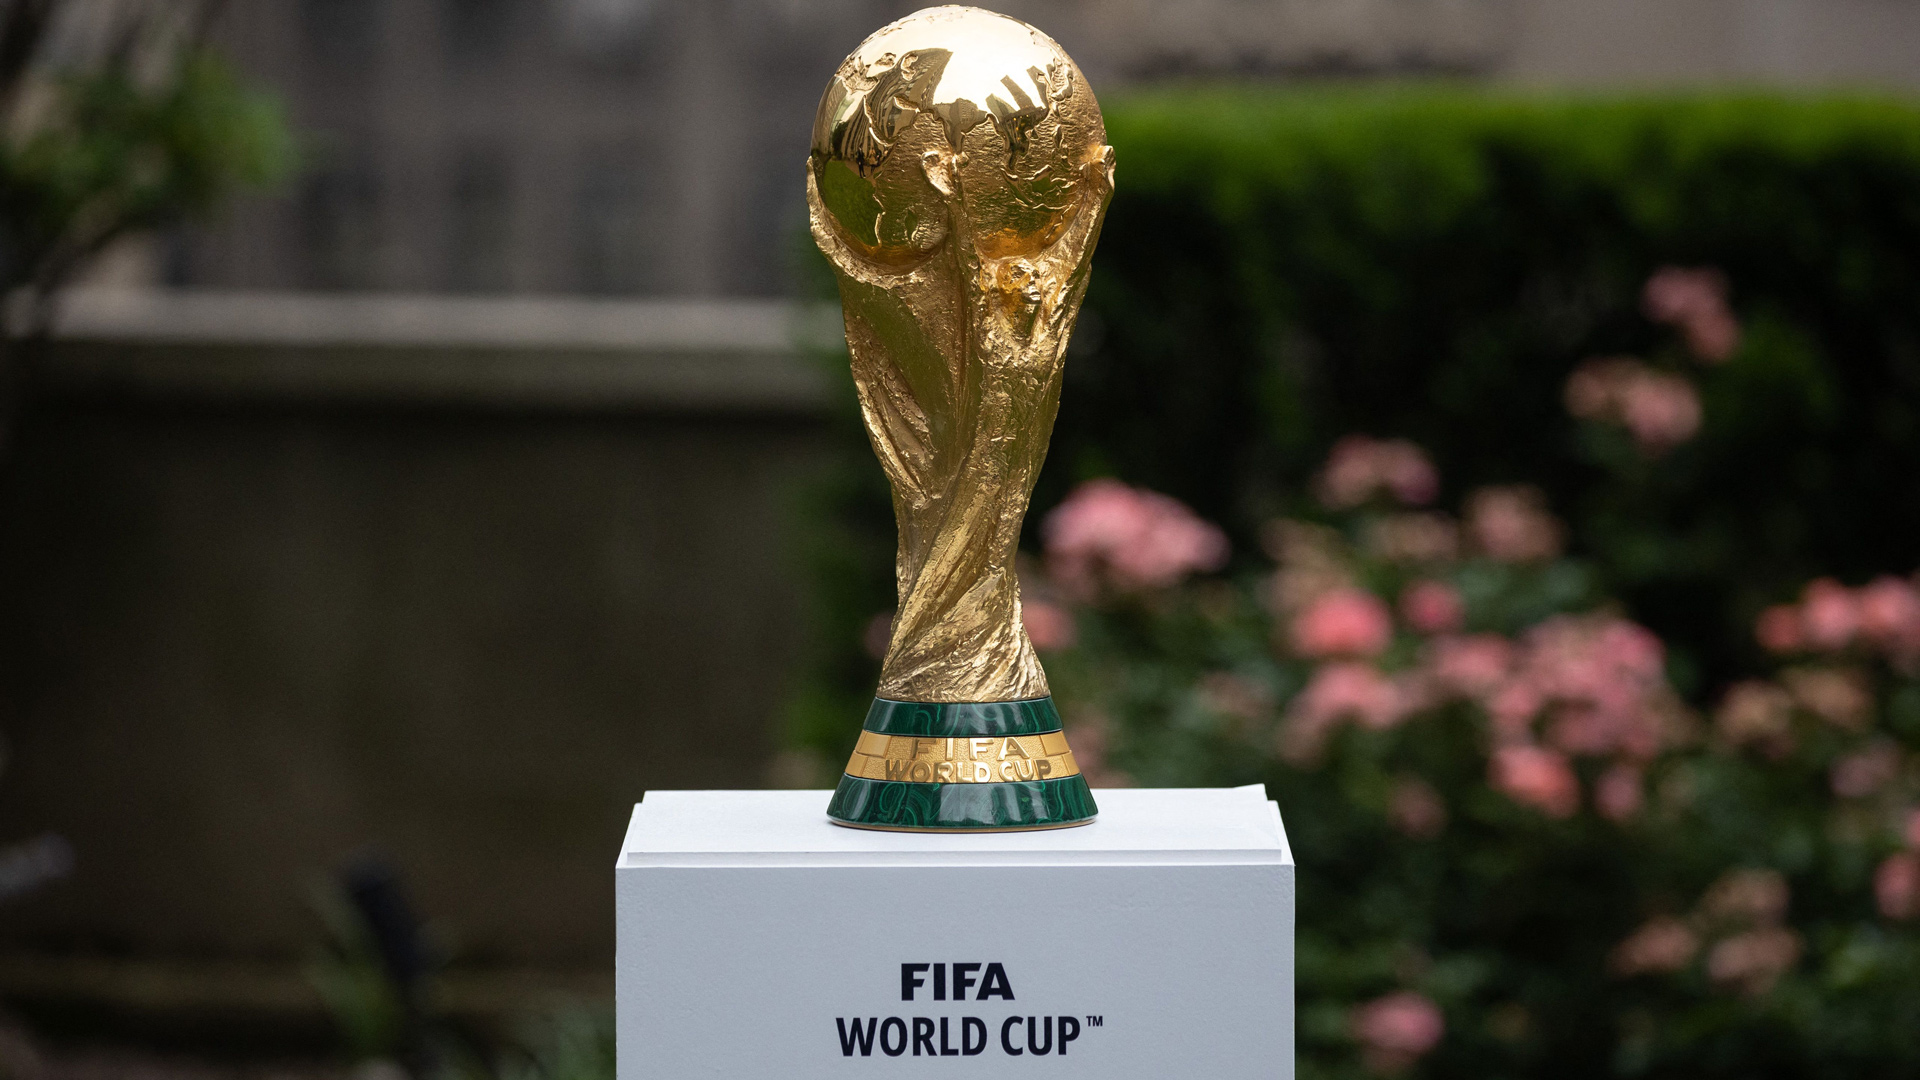 What to Know About the FIFA World Cup Trophy